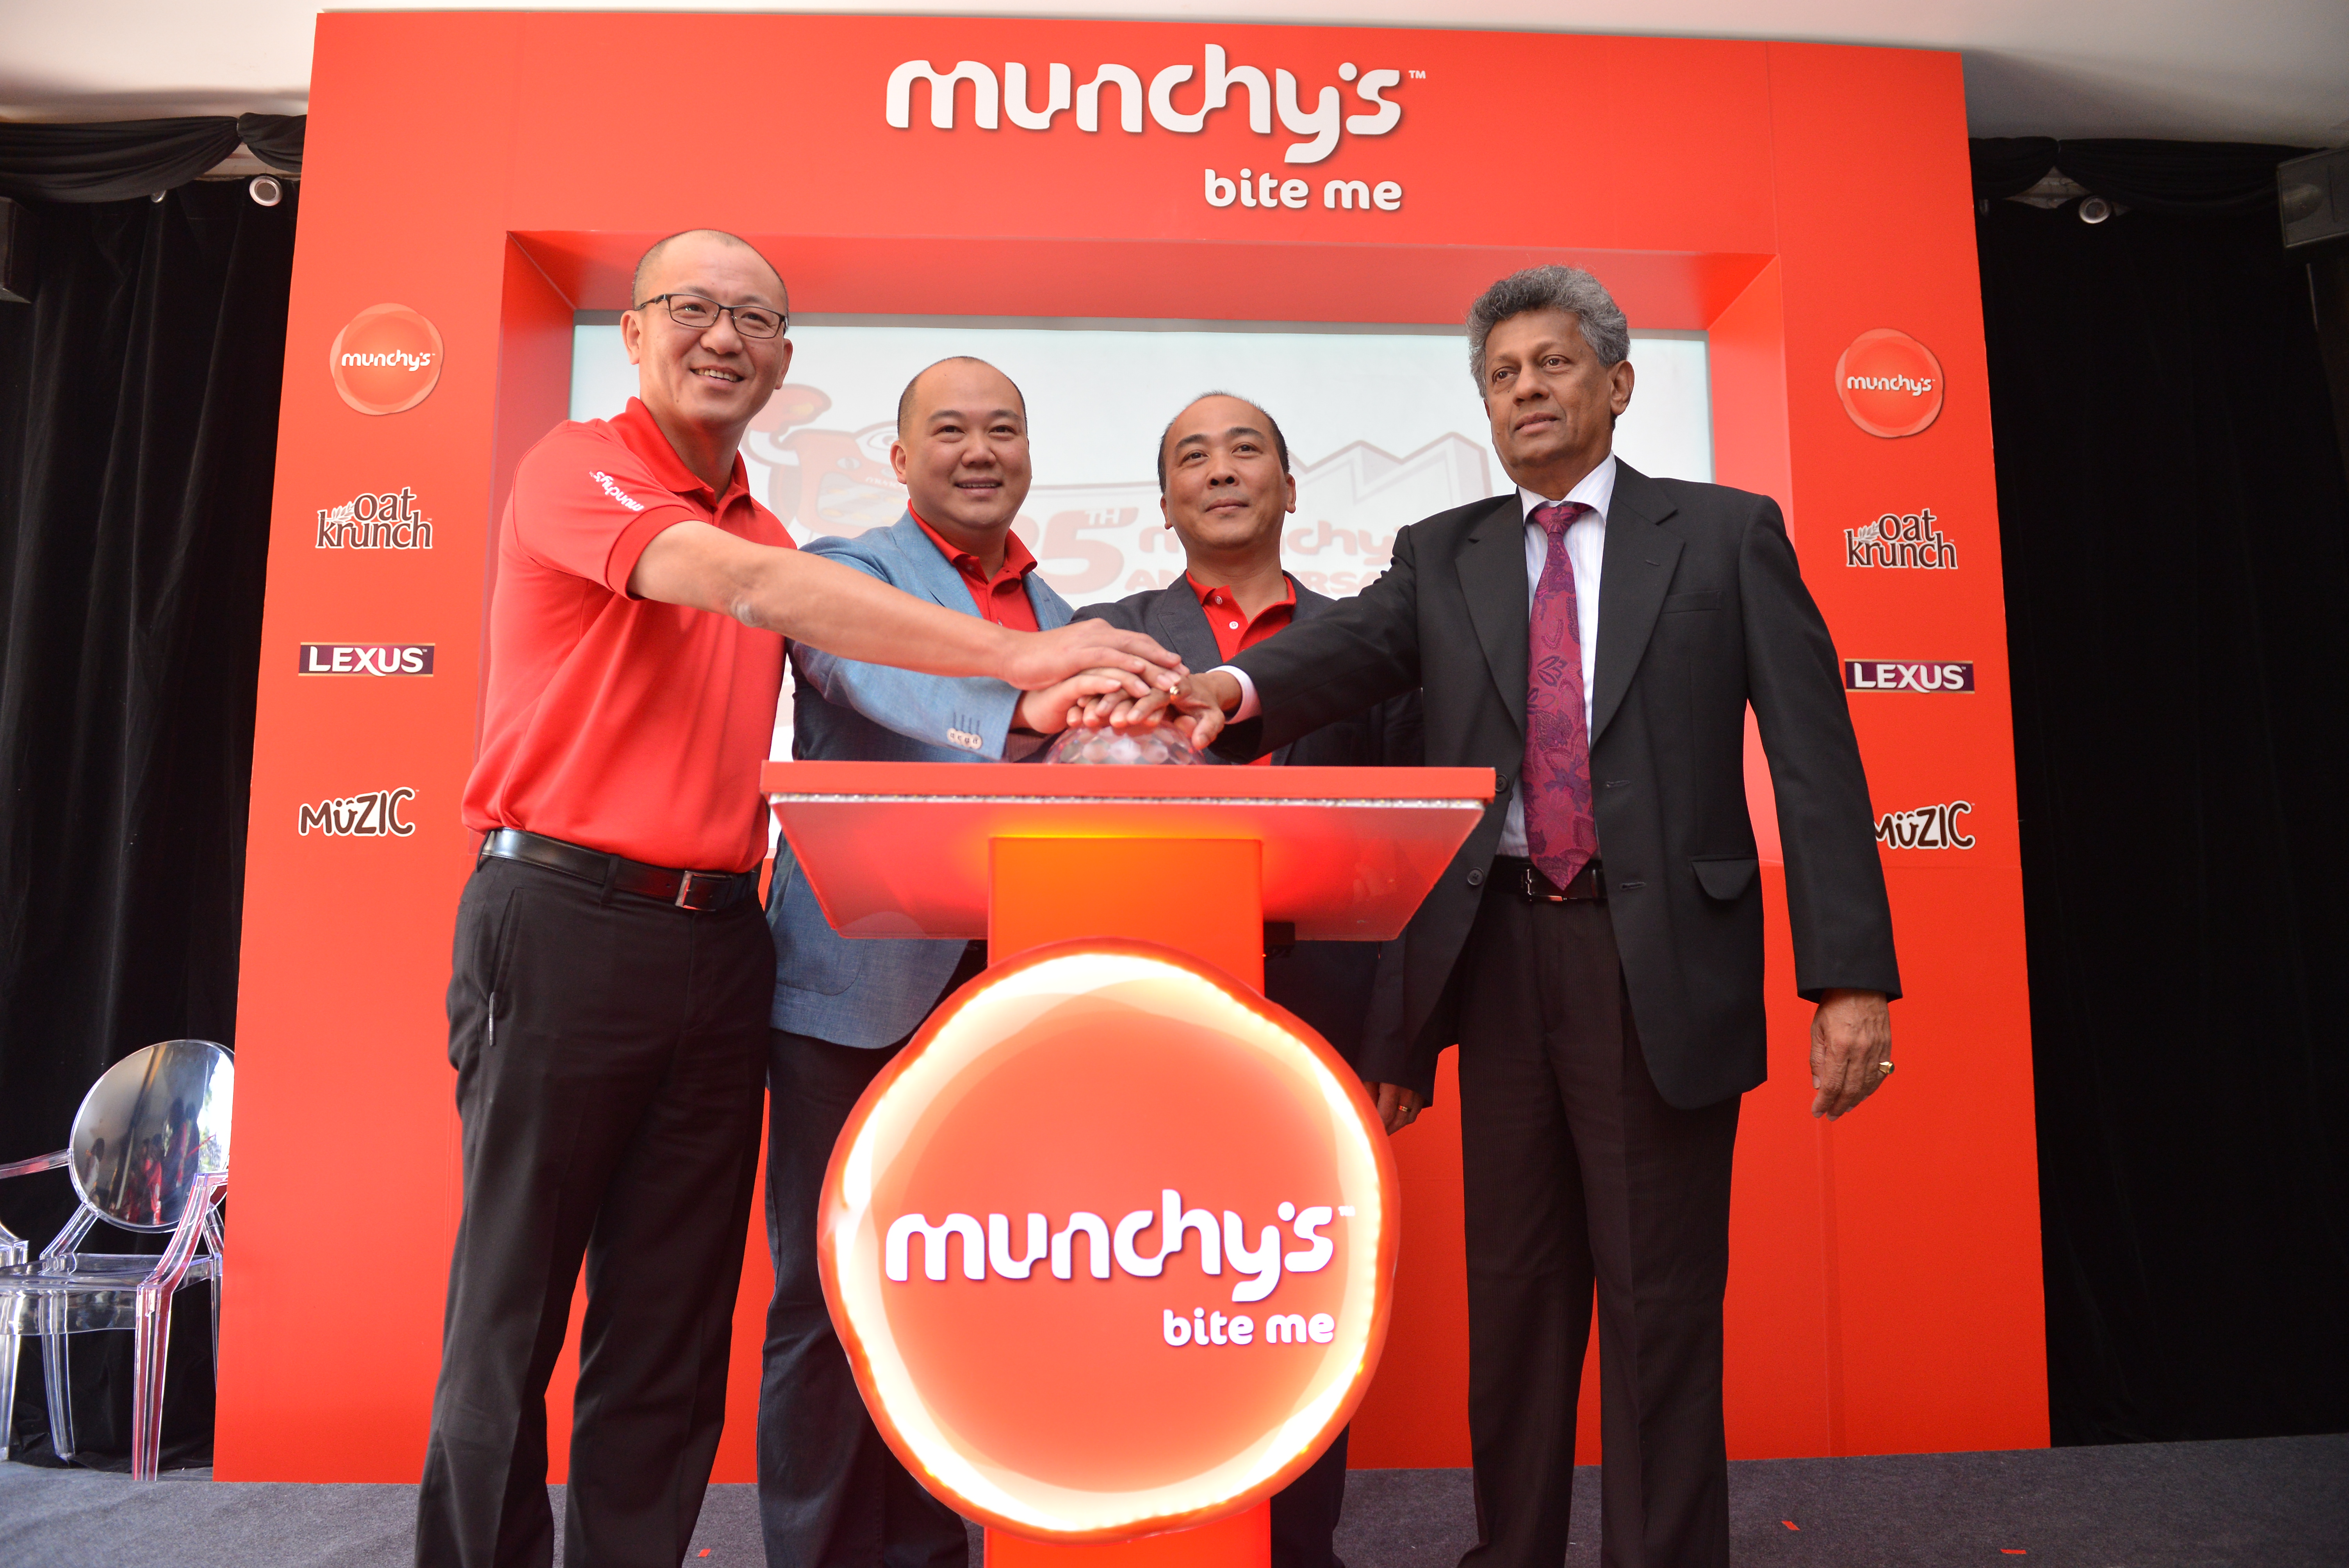 (From left to right) Rodney Wong, MUNCHY’S Commercial Director; Tan brothers – CK Tan and LK Tan, MUNCHY’S Founders; and Rajan Pillai, MUNCHY’S Senior Operations Director